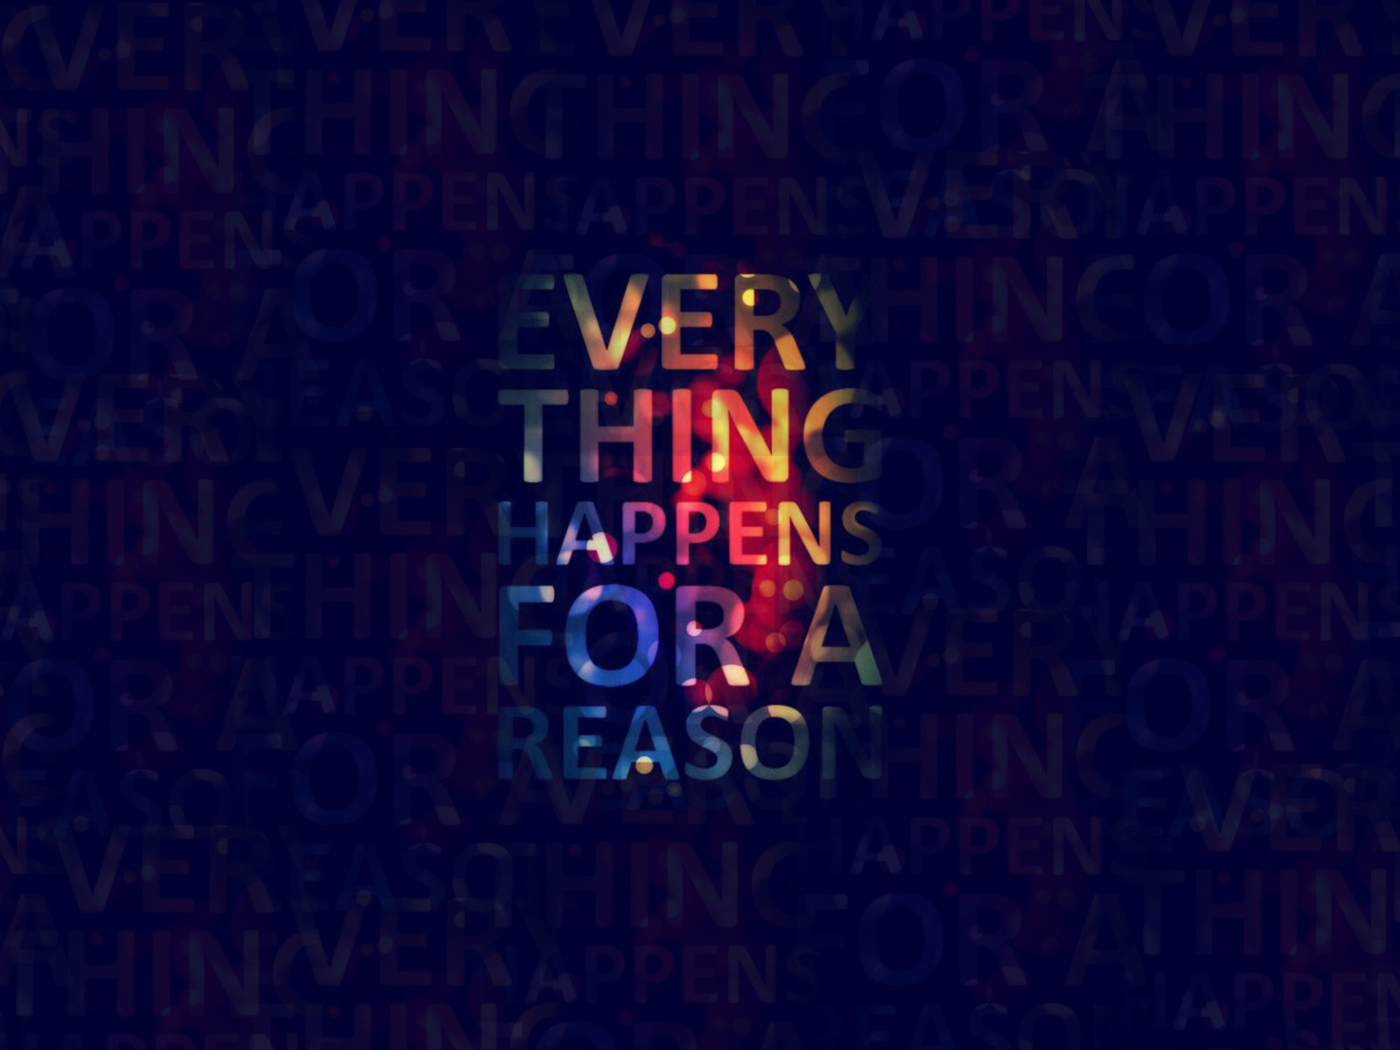 Everything Happens For A Reason wallpaper 1400x1050